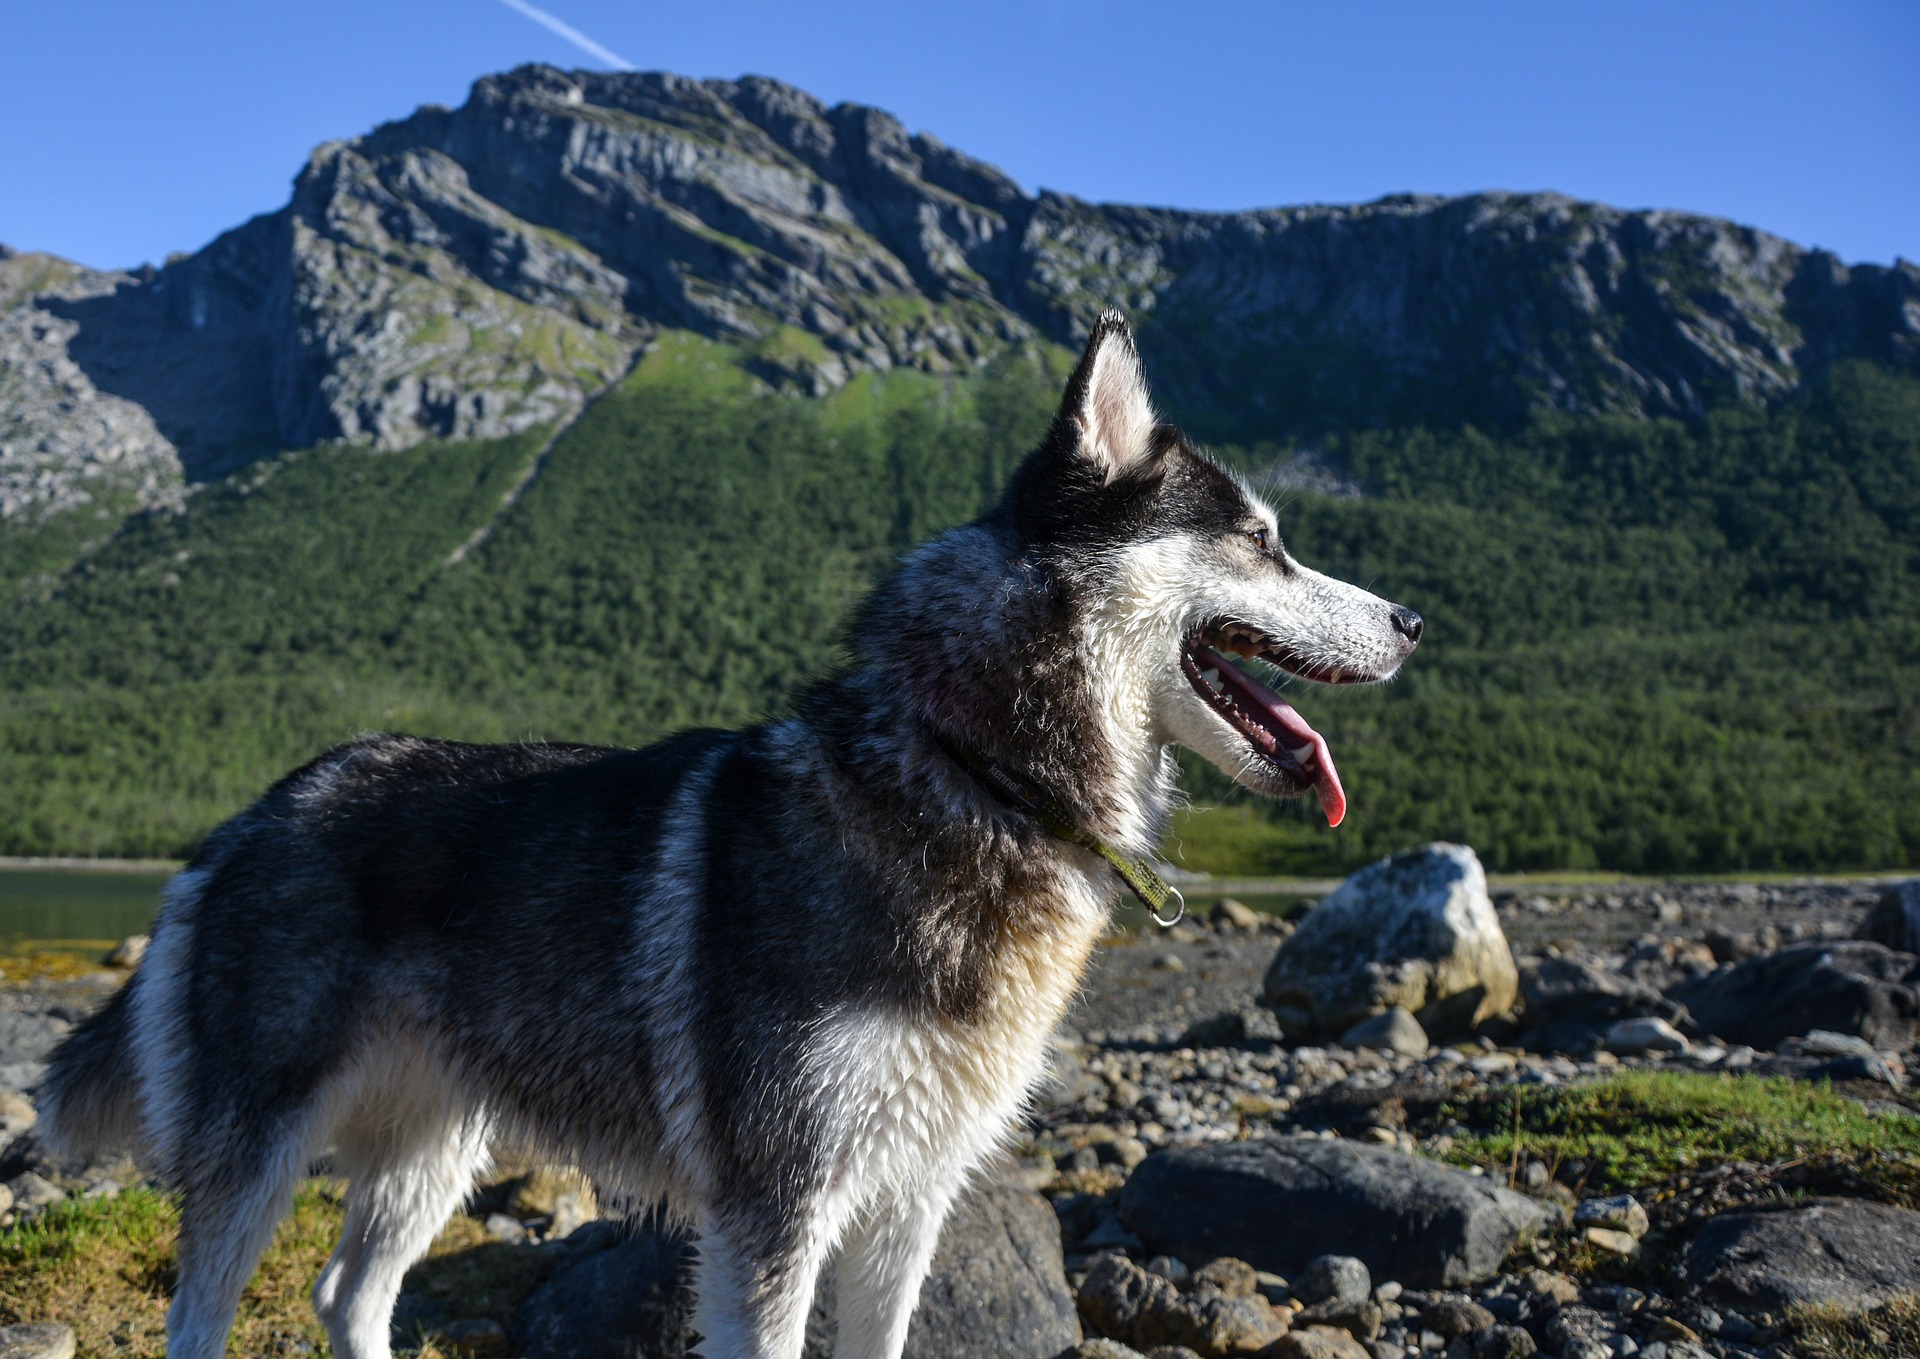 A husky close-up in front of a mountain